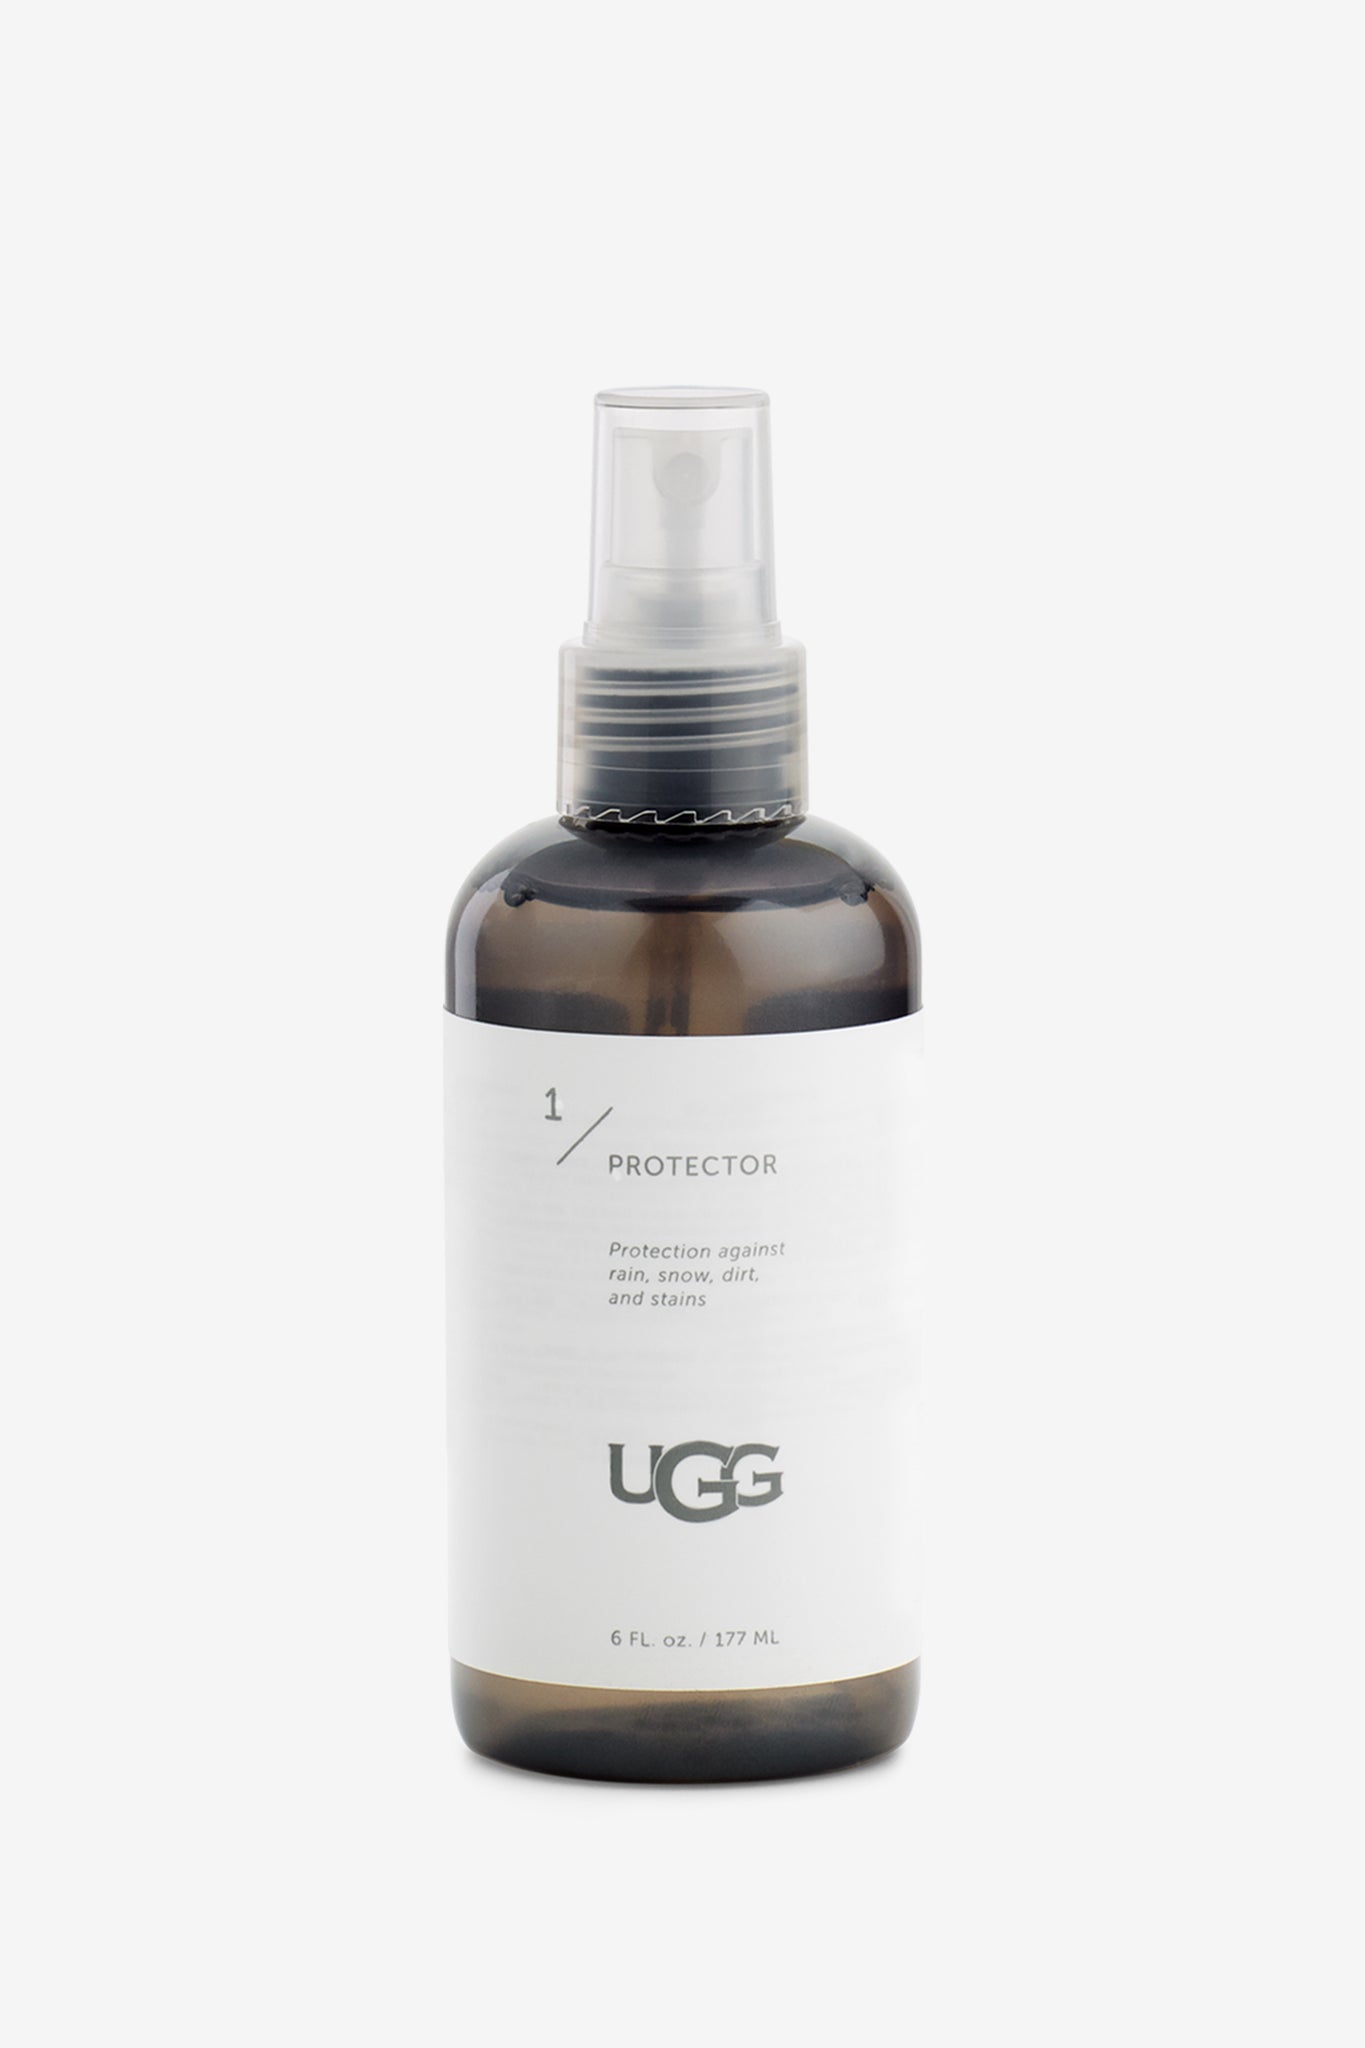 UGG Care Protector